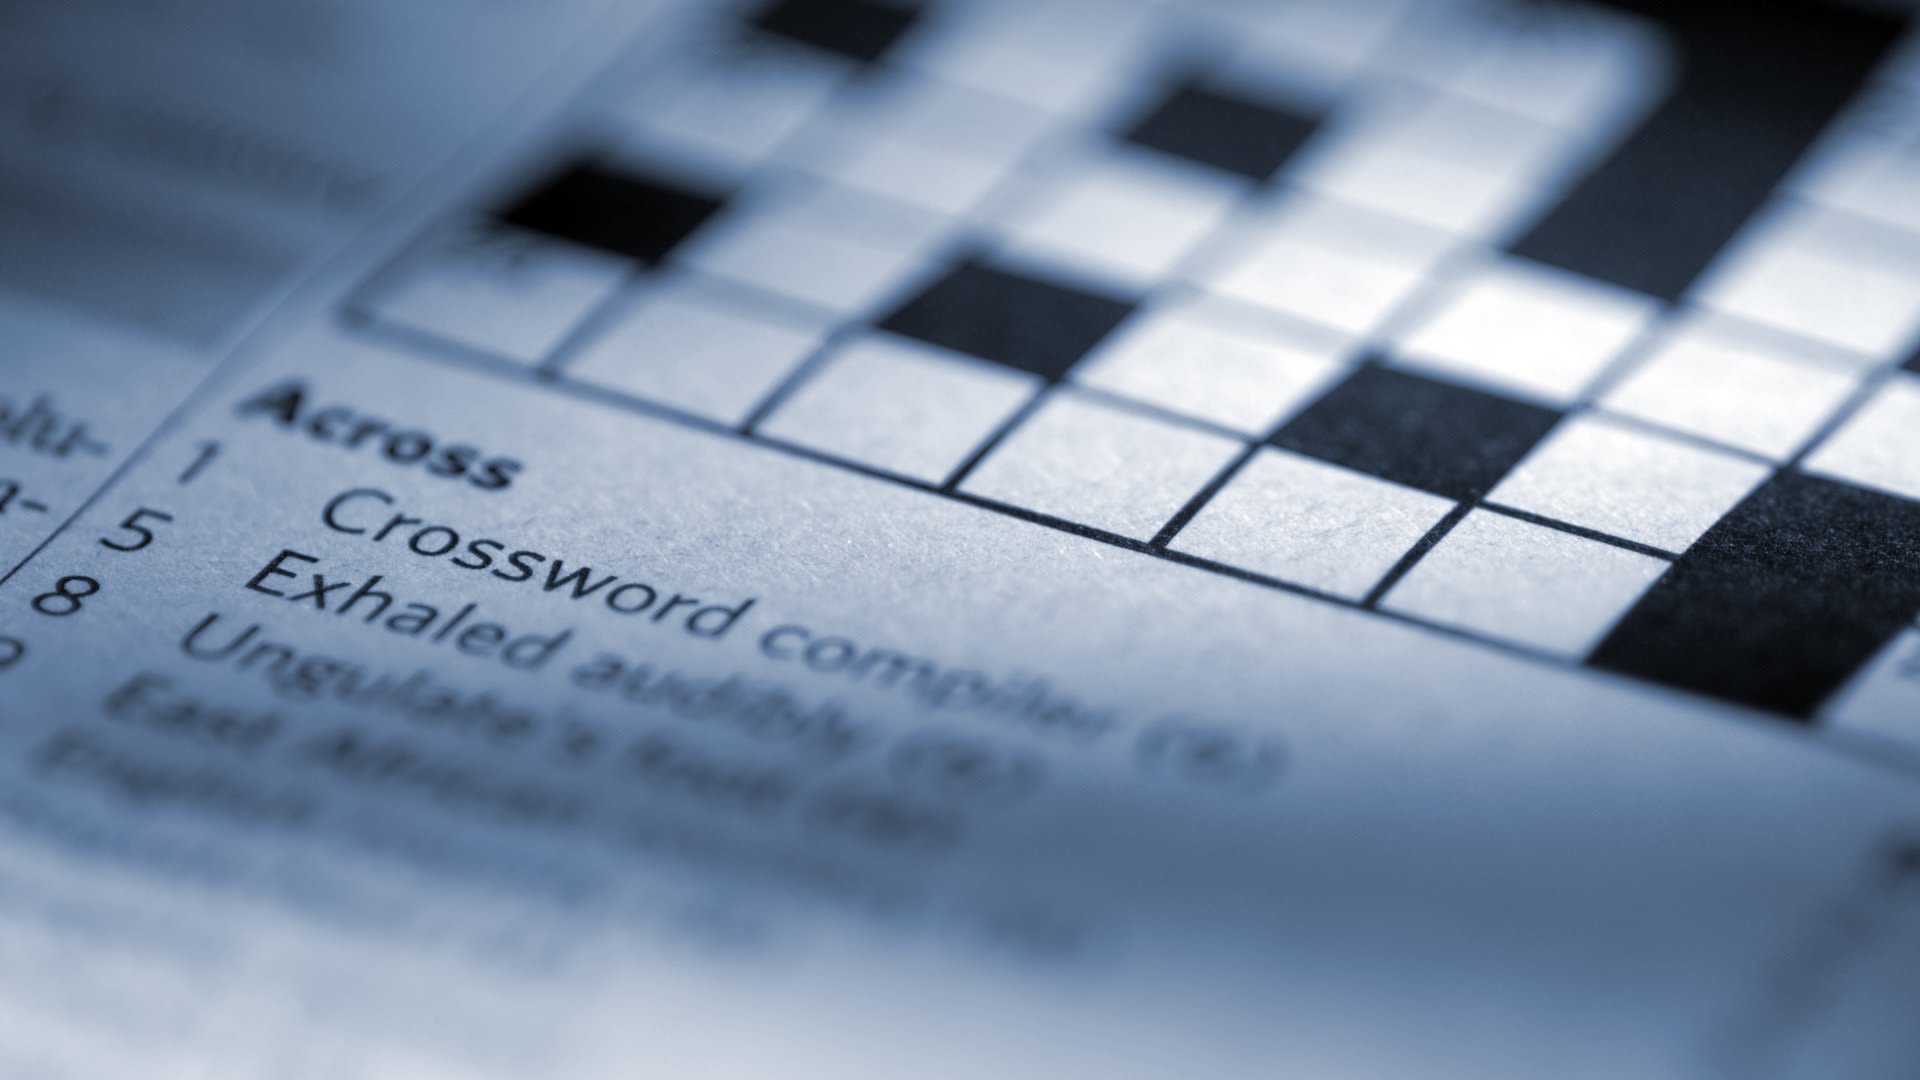 NYT's The Mini crossword answers for July 23